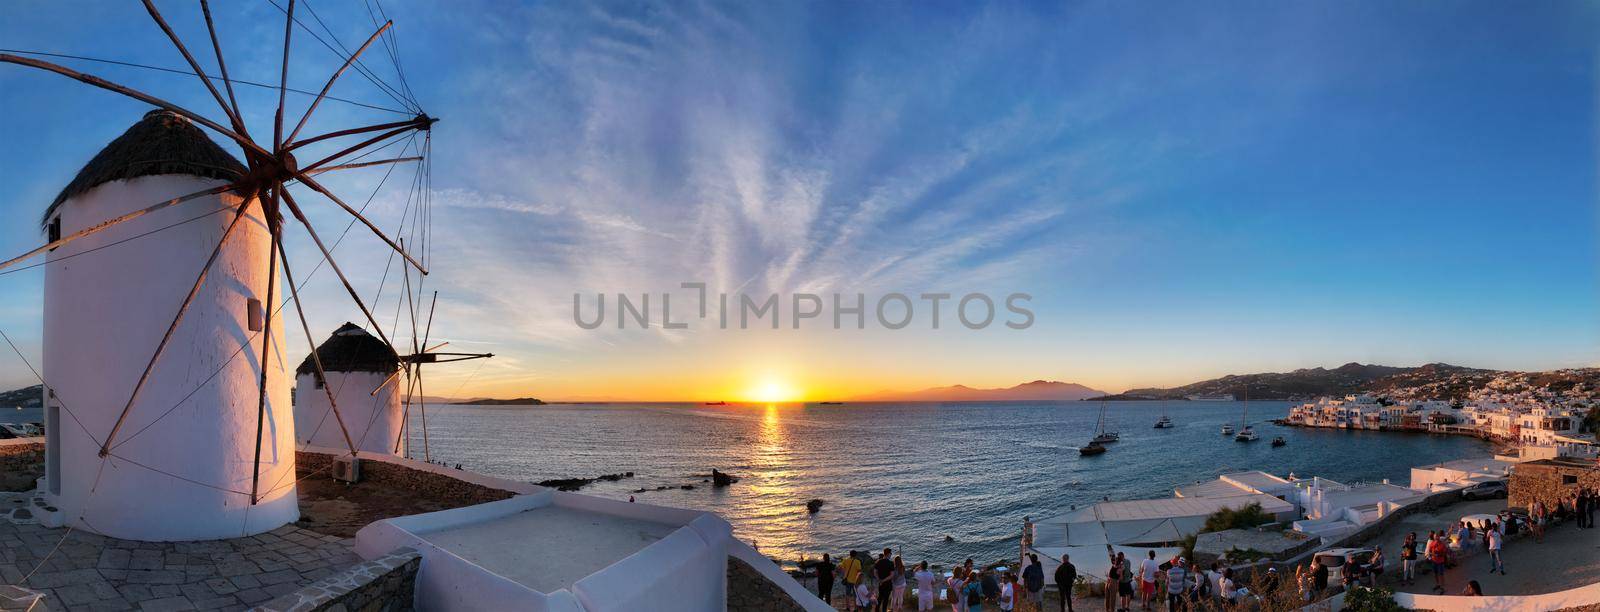 MYKONOS, GREECE - MAY 29, 2019: Panorama of traditional greek windmills on Mykonos island on sunset with dramatic sky and Little Venice quarter with tourist crowd